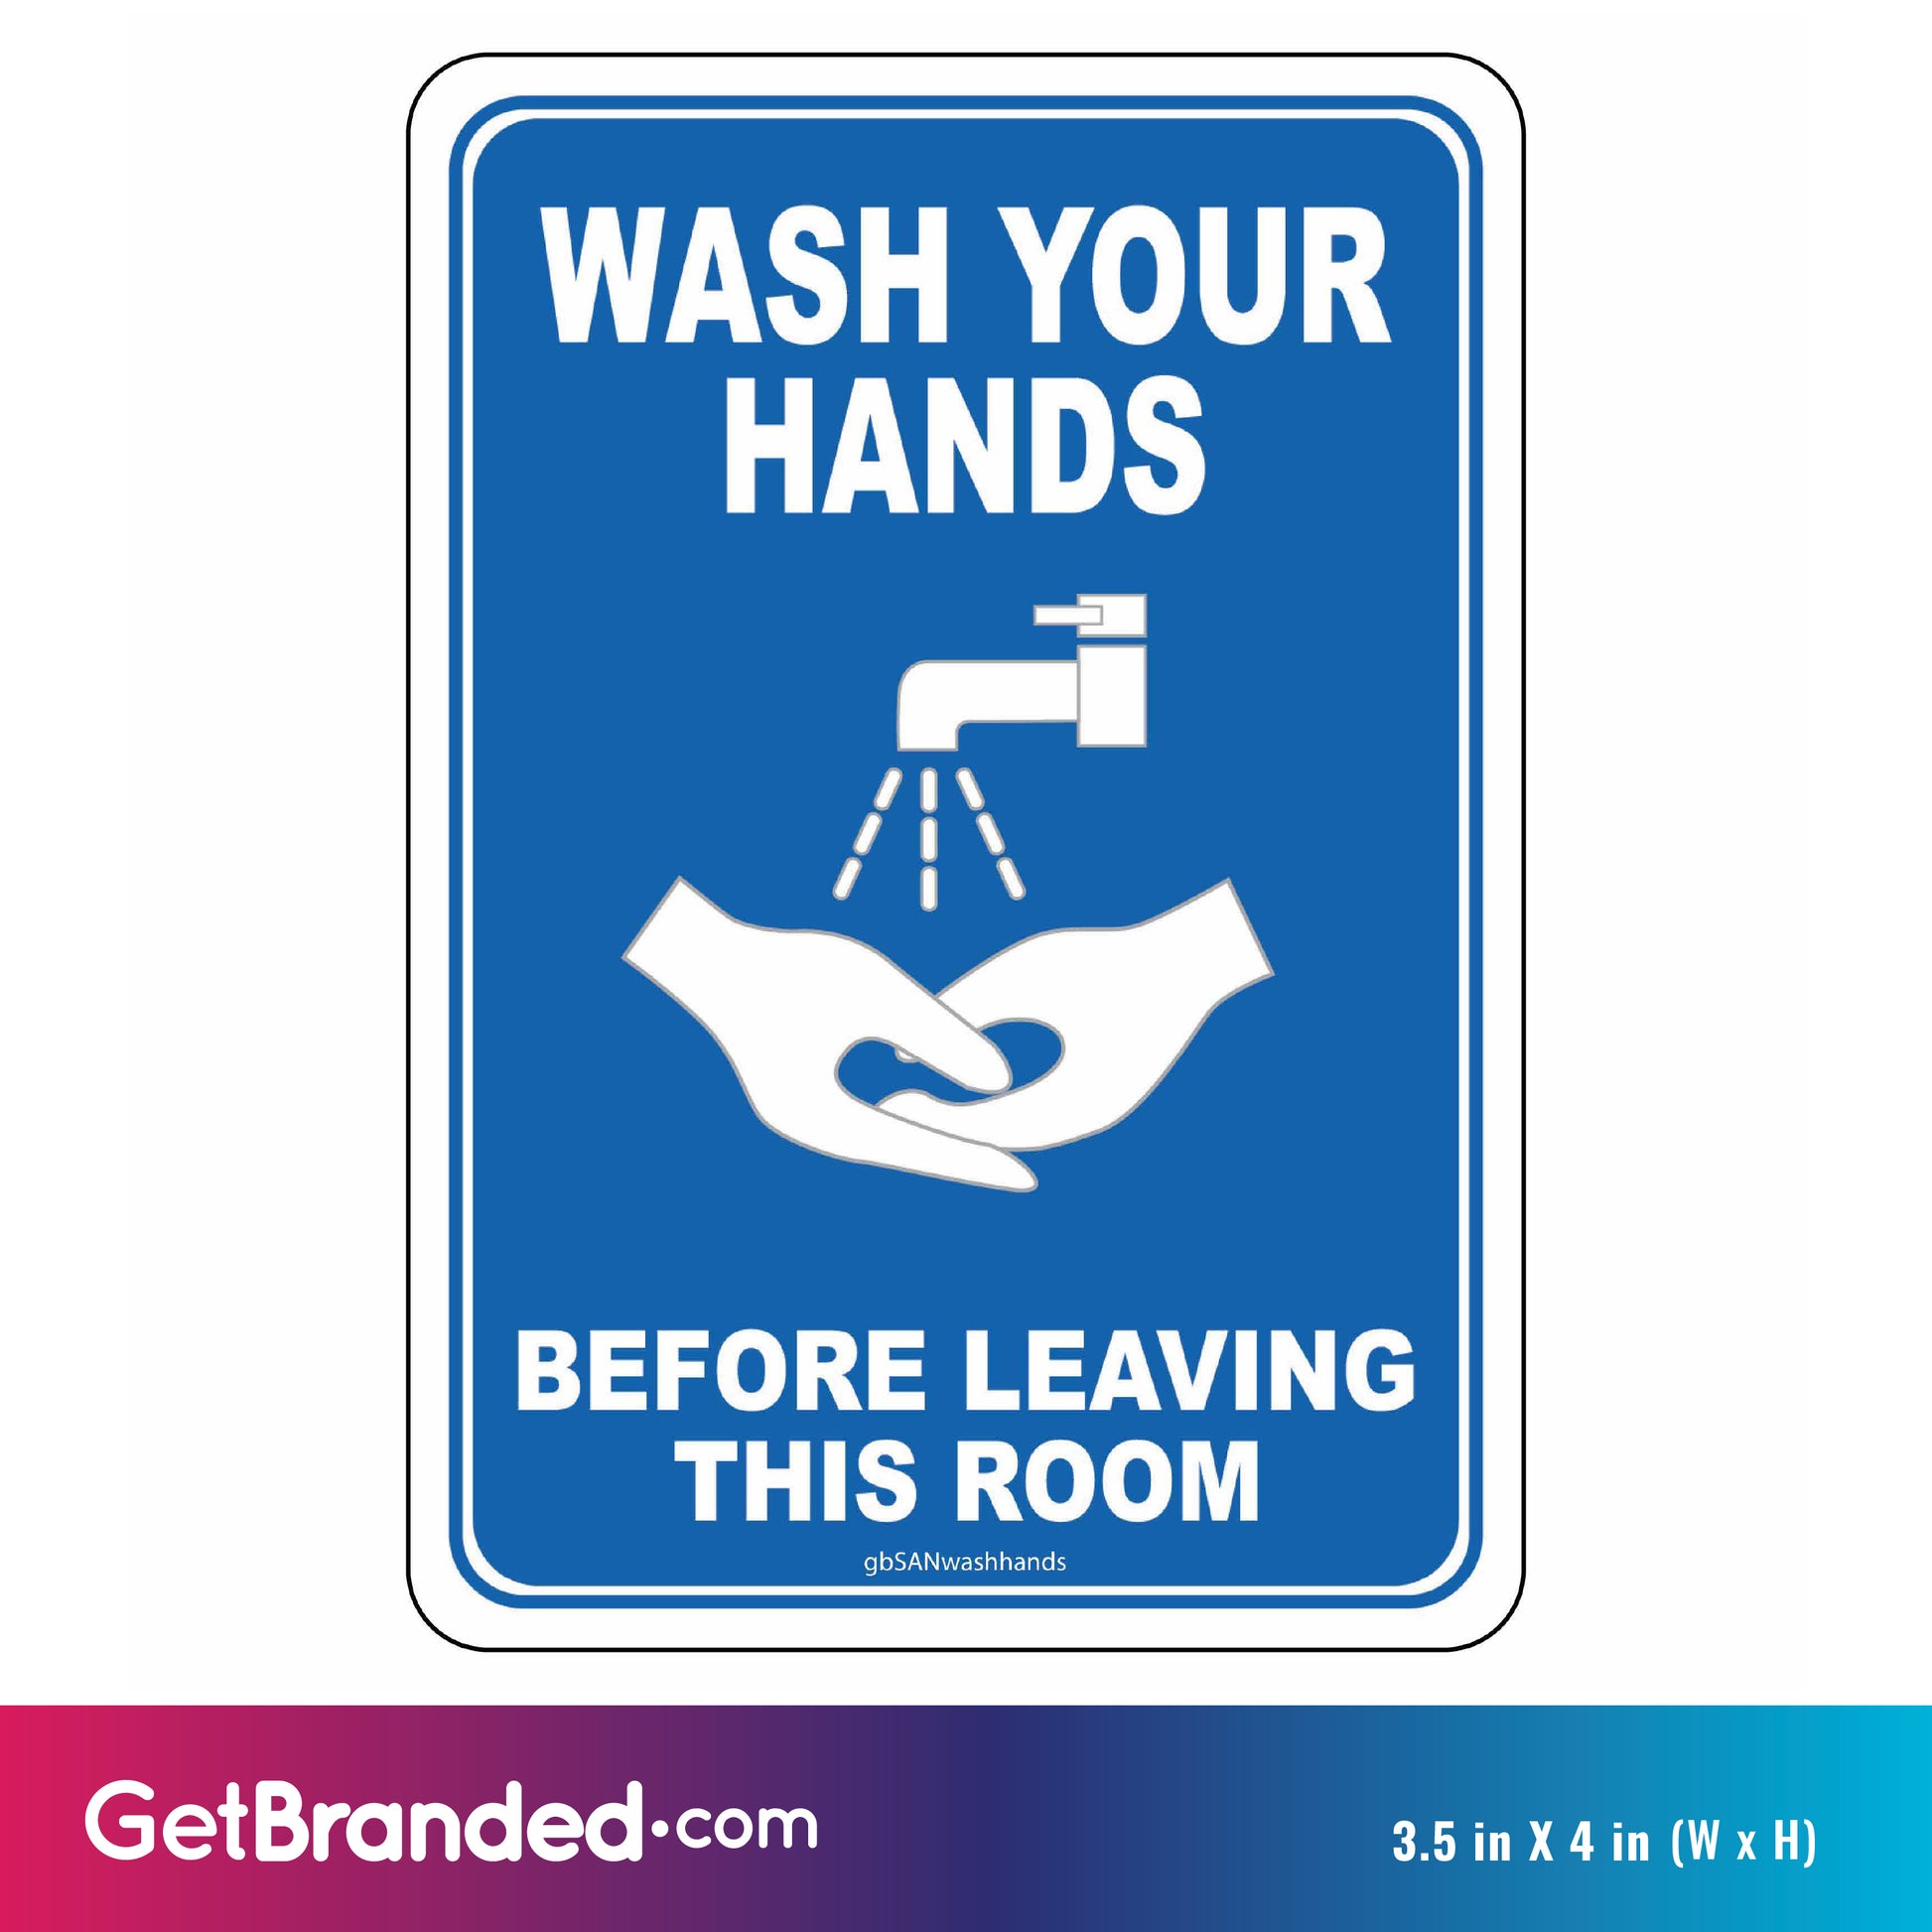 Wash Hands Before Leaving this Room Decal size guide.